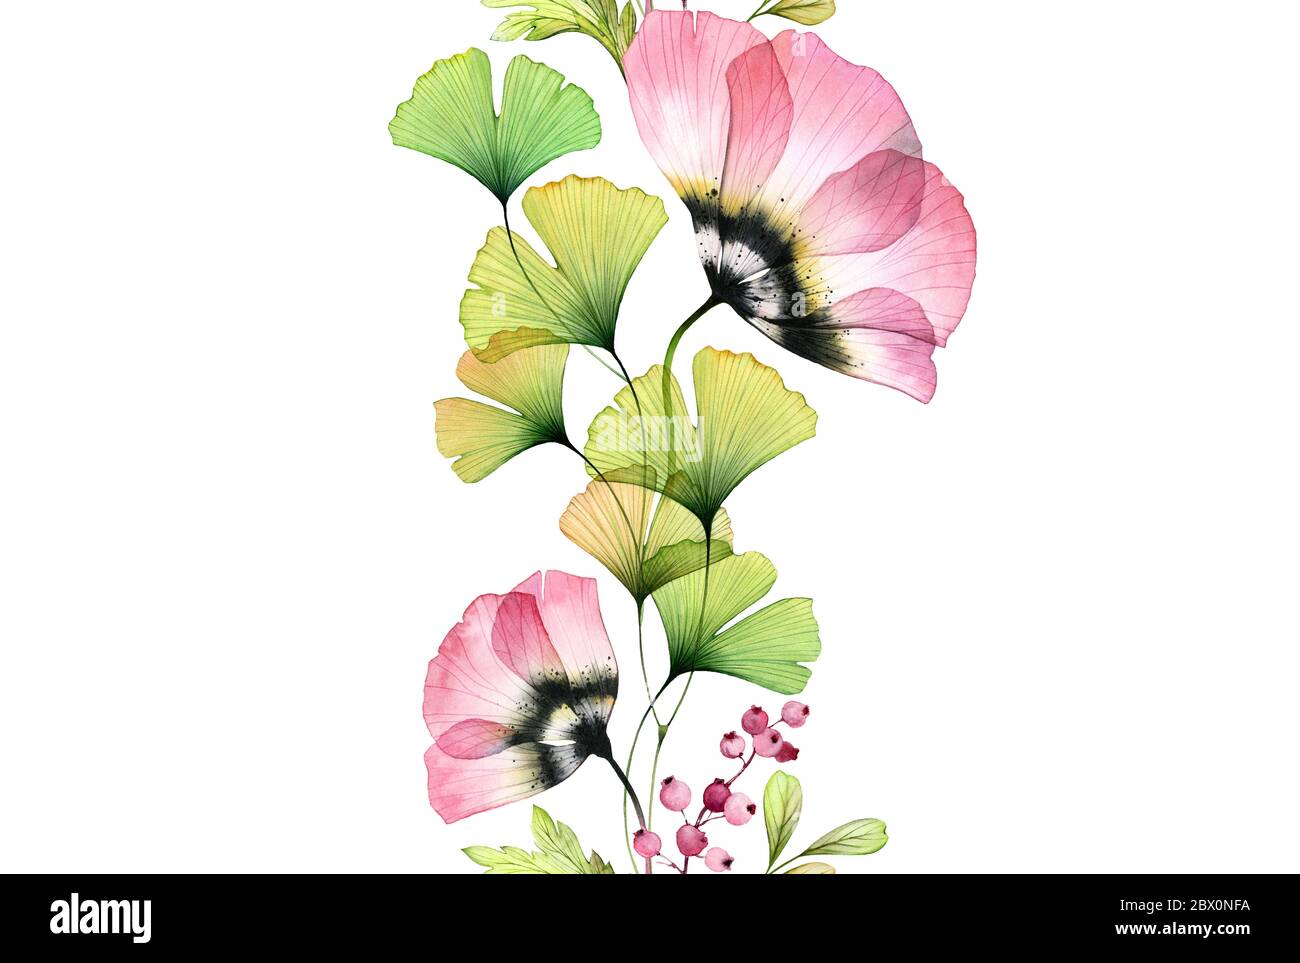 Watercolor tulips seamless border. Vertical repetitive pattern. Abstract pink flowers with ginkgo eaves on white. Botanical illustration for cards Stock Photo